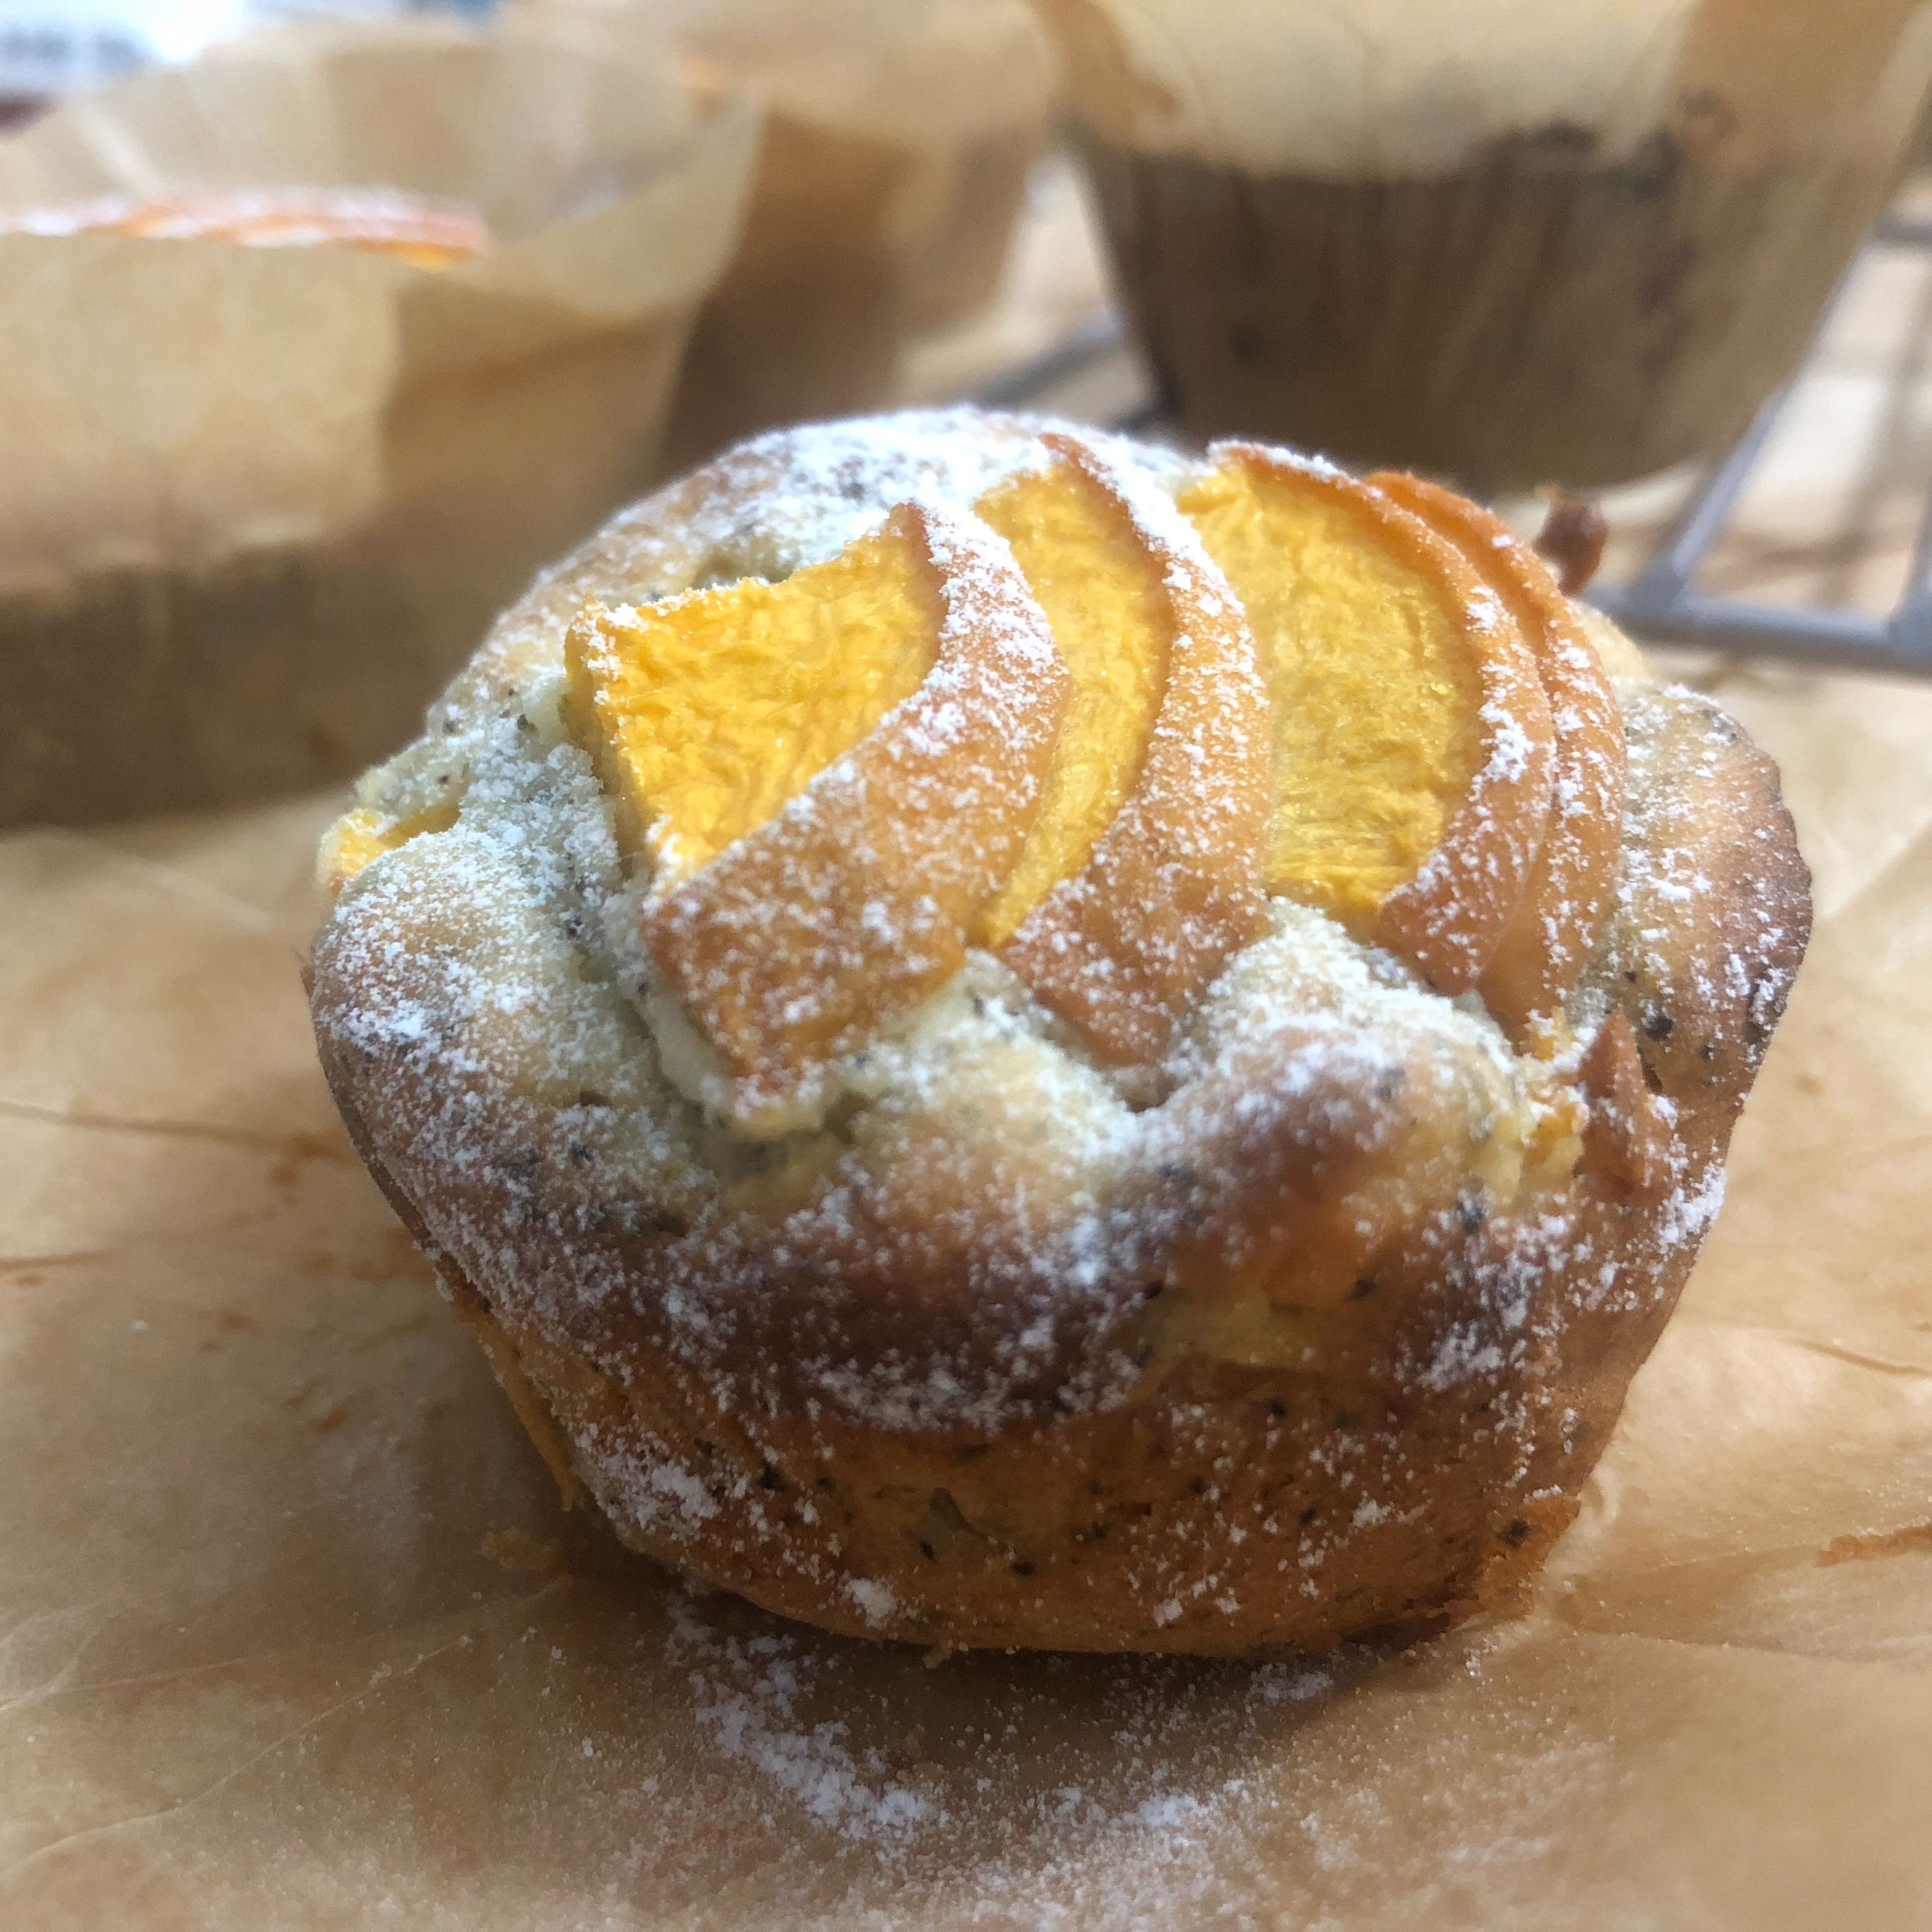 Preheat oven to 170C. Pour into each muffin liner (can use a spoon) and put with sliced peach topping. Then bake at 170C for 25 minuets or till light golden brown. After baking, dust with powdered sugar. Enjoy!